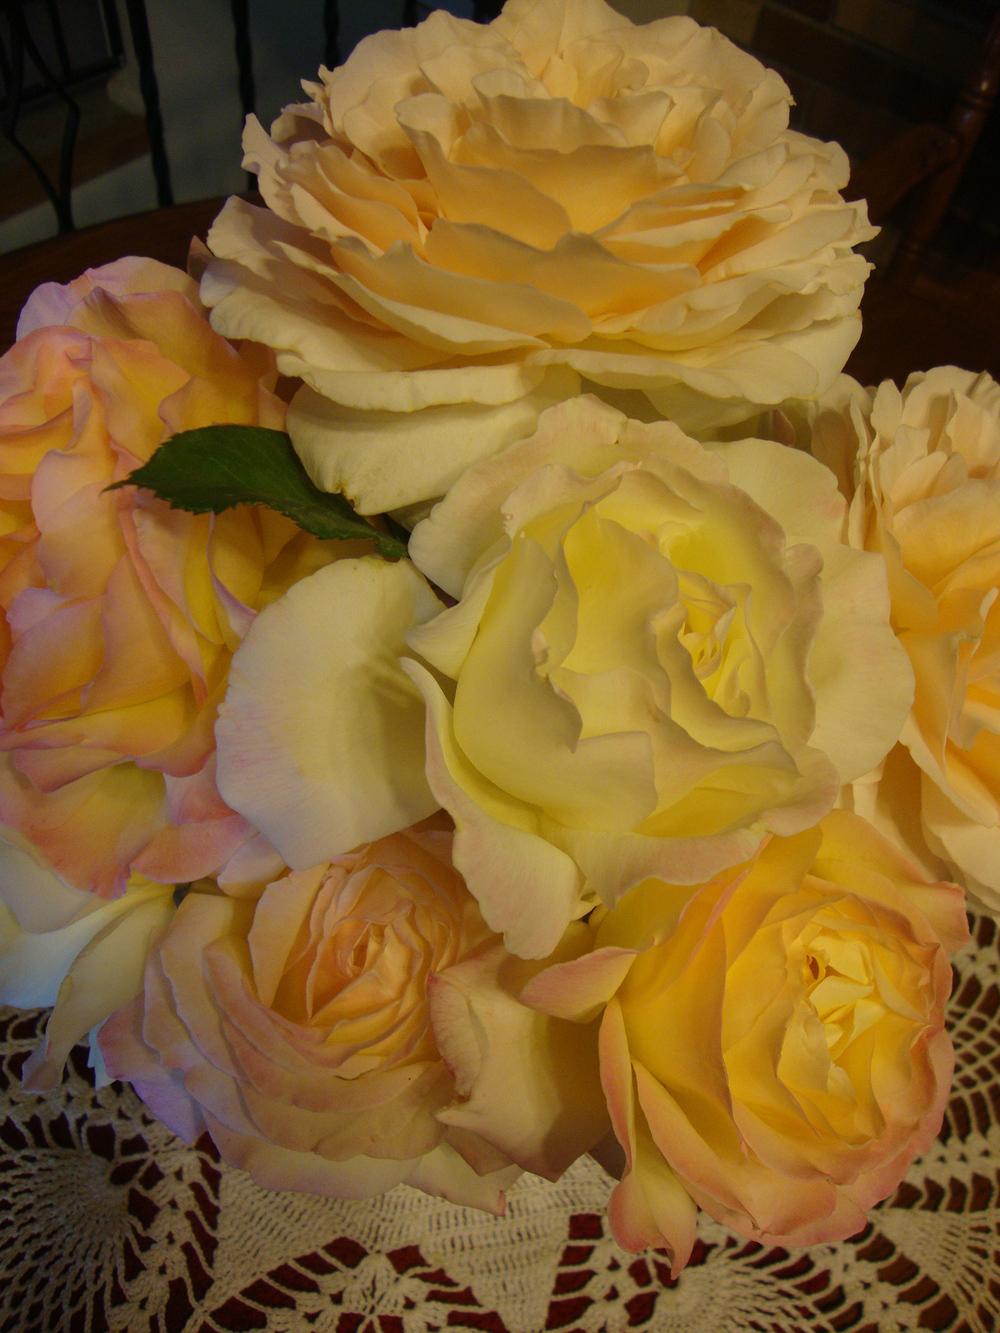 Photo of Roses (Rosa) uploaded by Paul2032